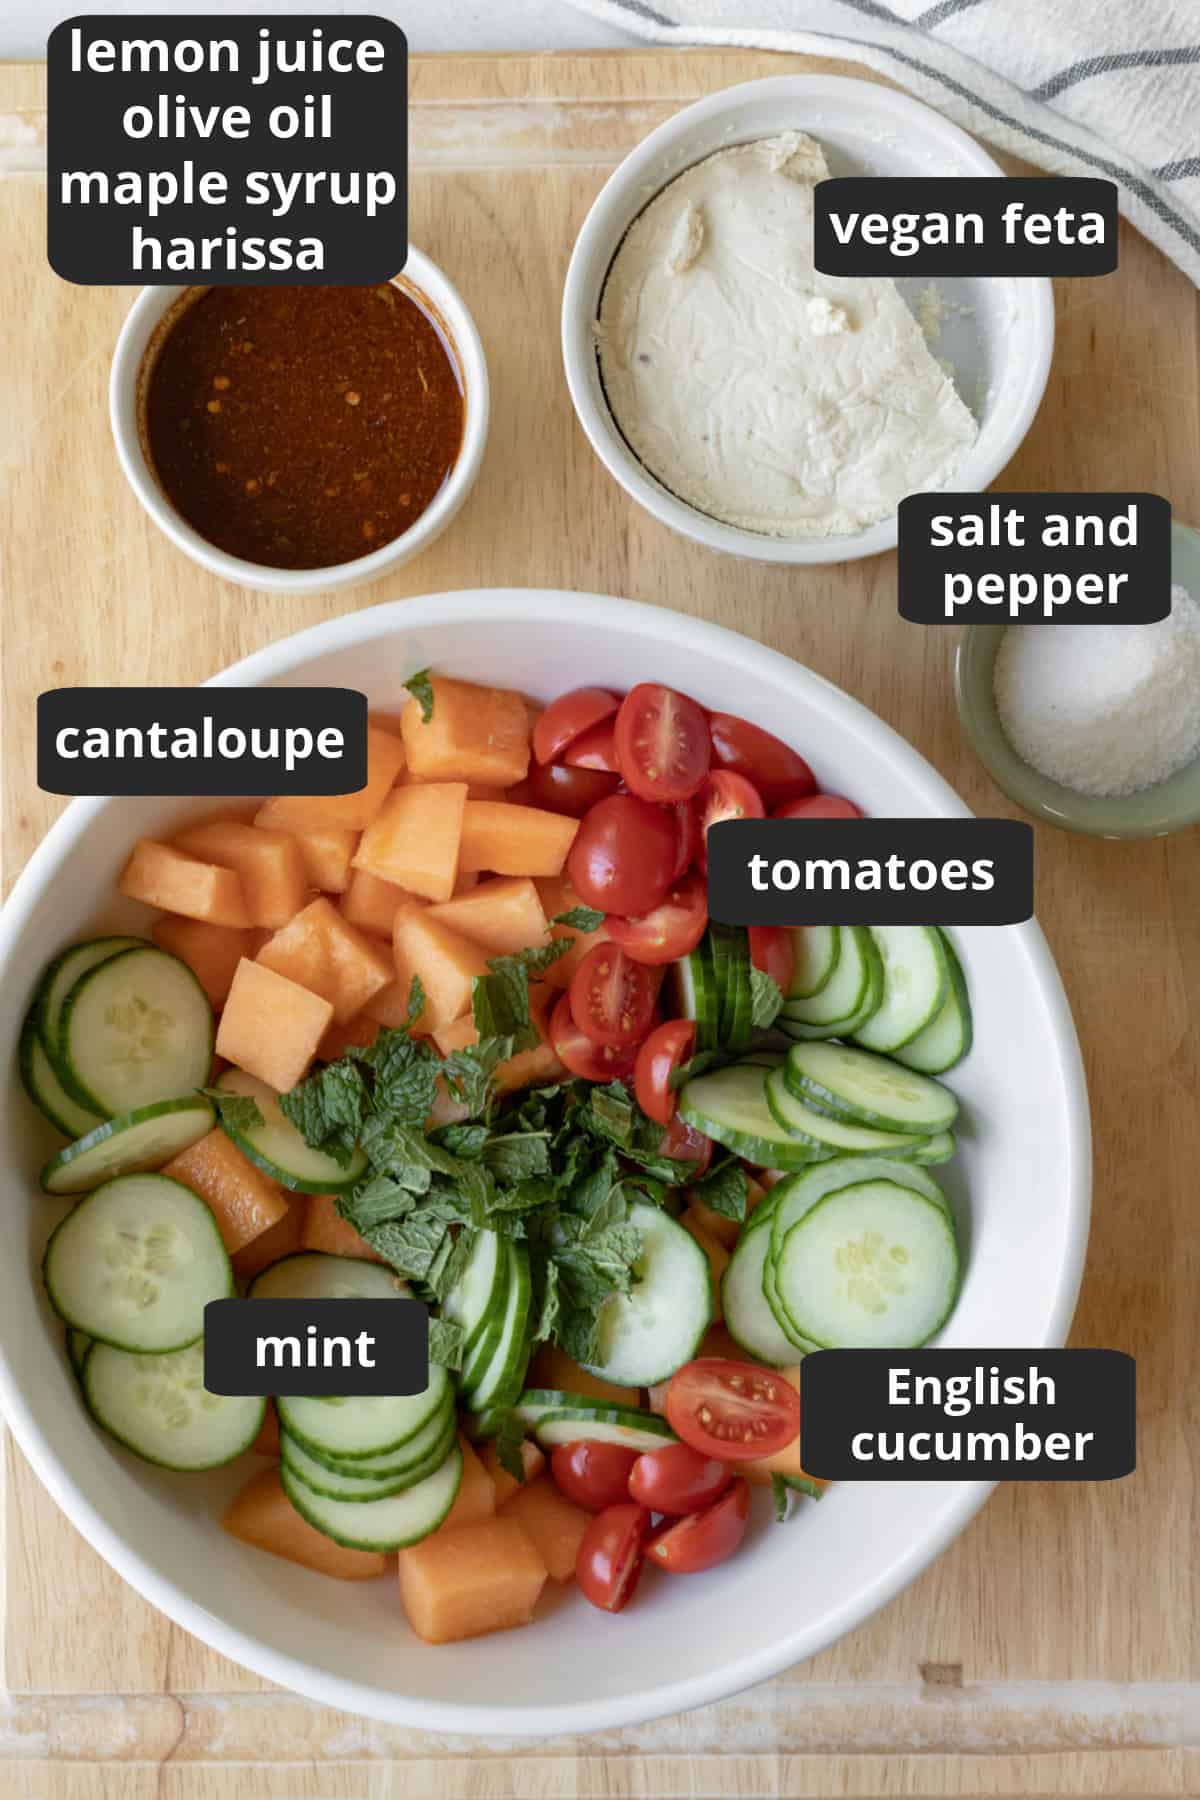 photo of ingredients with fruit and vegetables in a bowl, dressing and feta on the side.